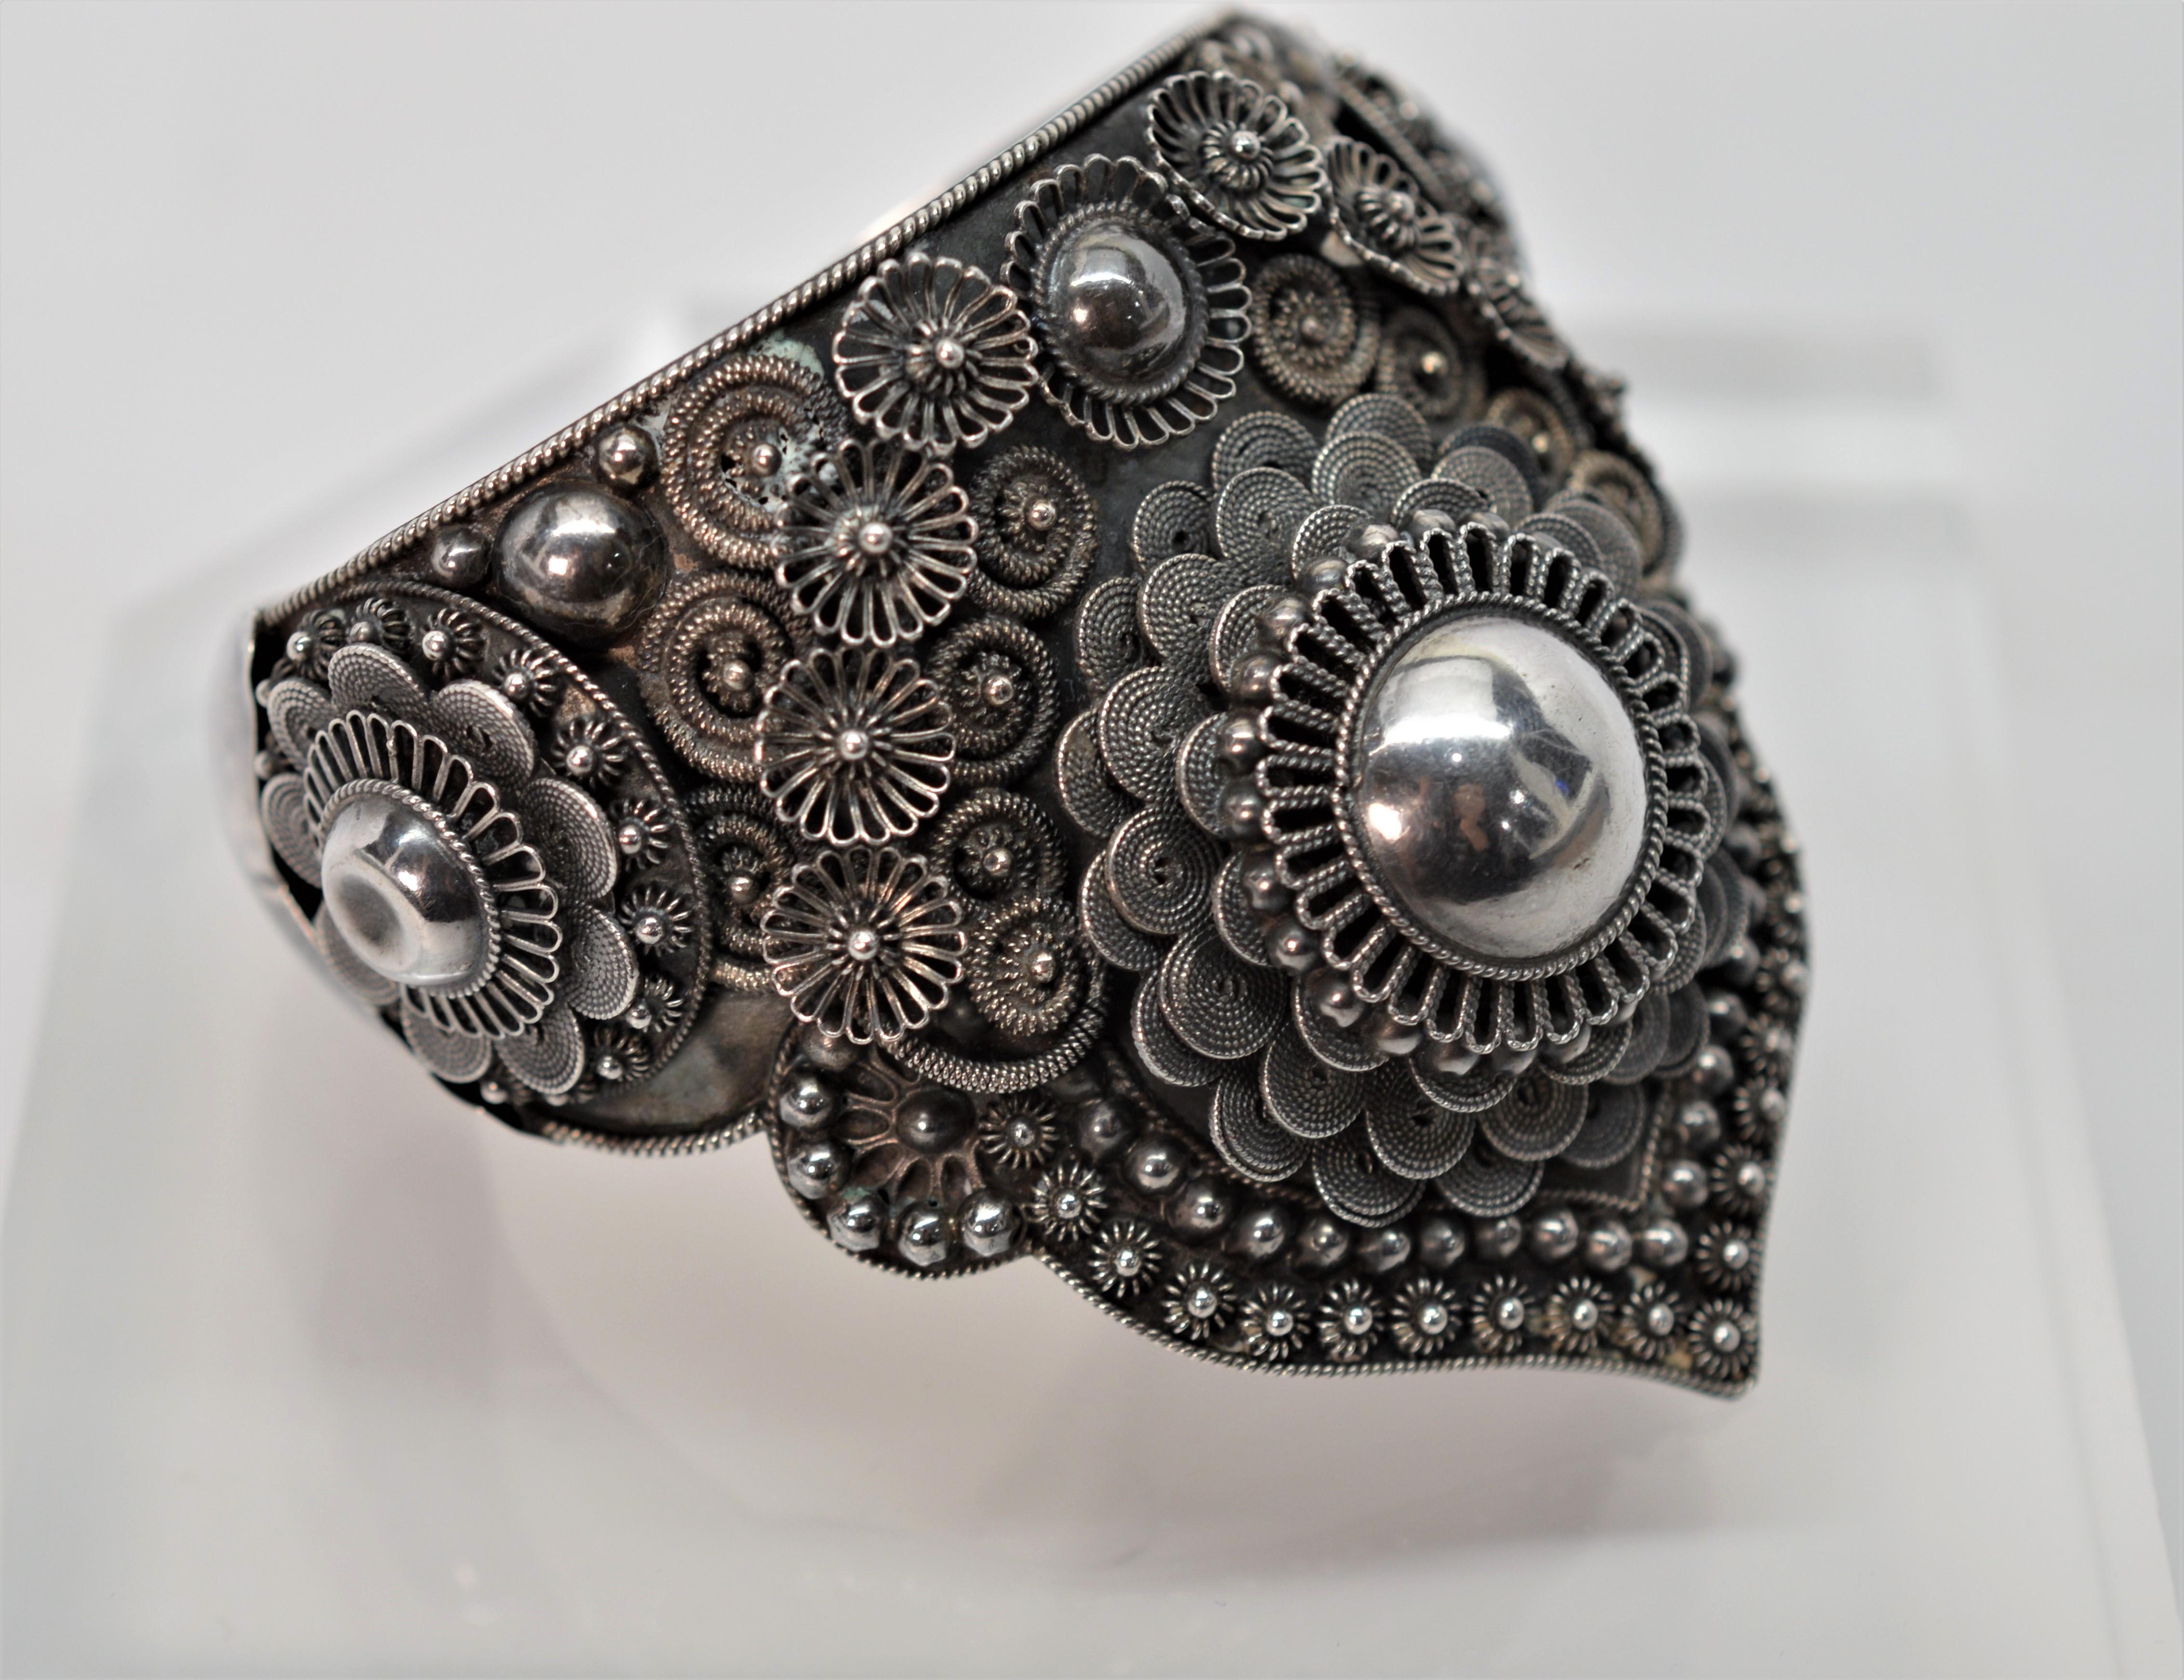 A spectacular three dimensional work of art in silver with lace like flowers, beads, balls and spiral rope designs. The bold handkerchief shape is fully adorned with fabulous artisan silver appliques. Measures approximately 2-1/2 inches to the